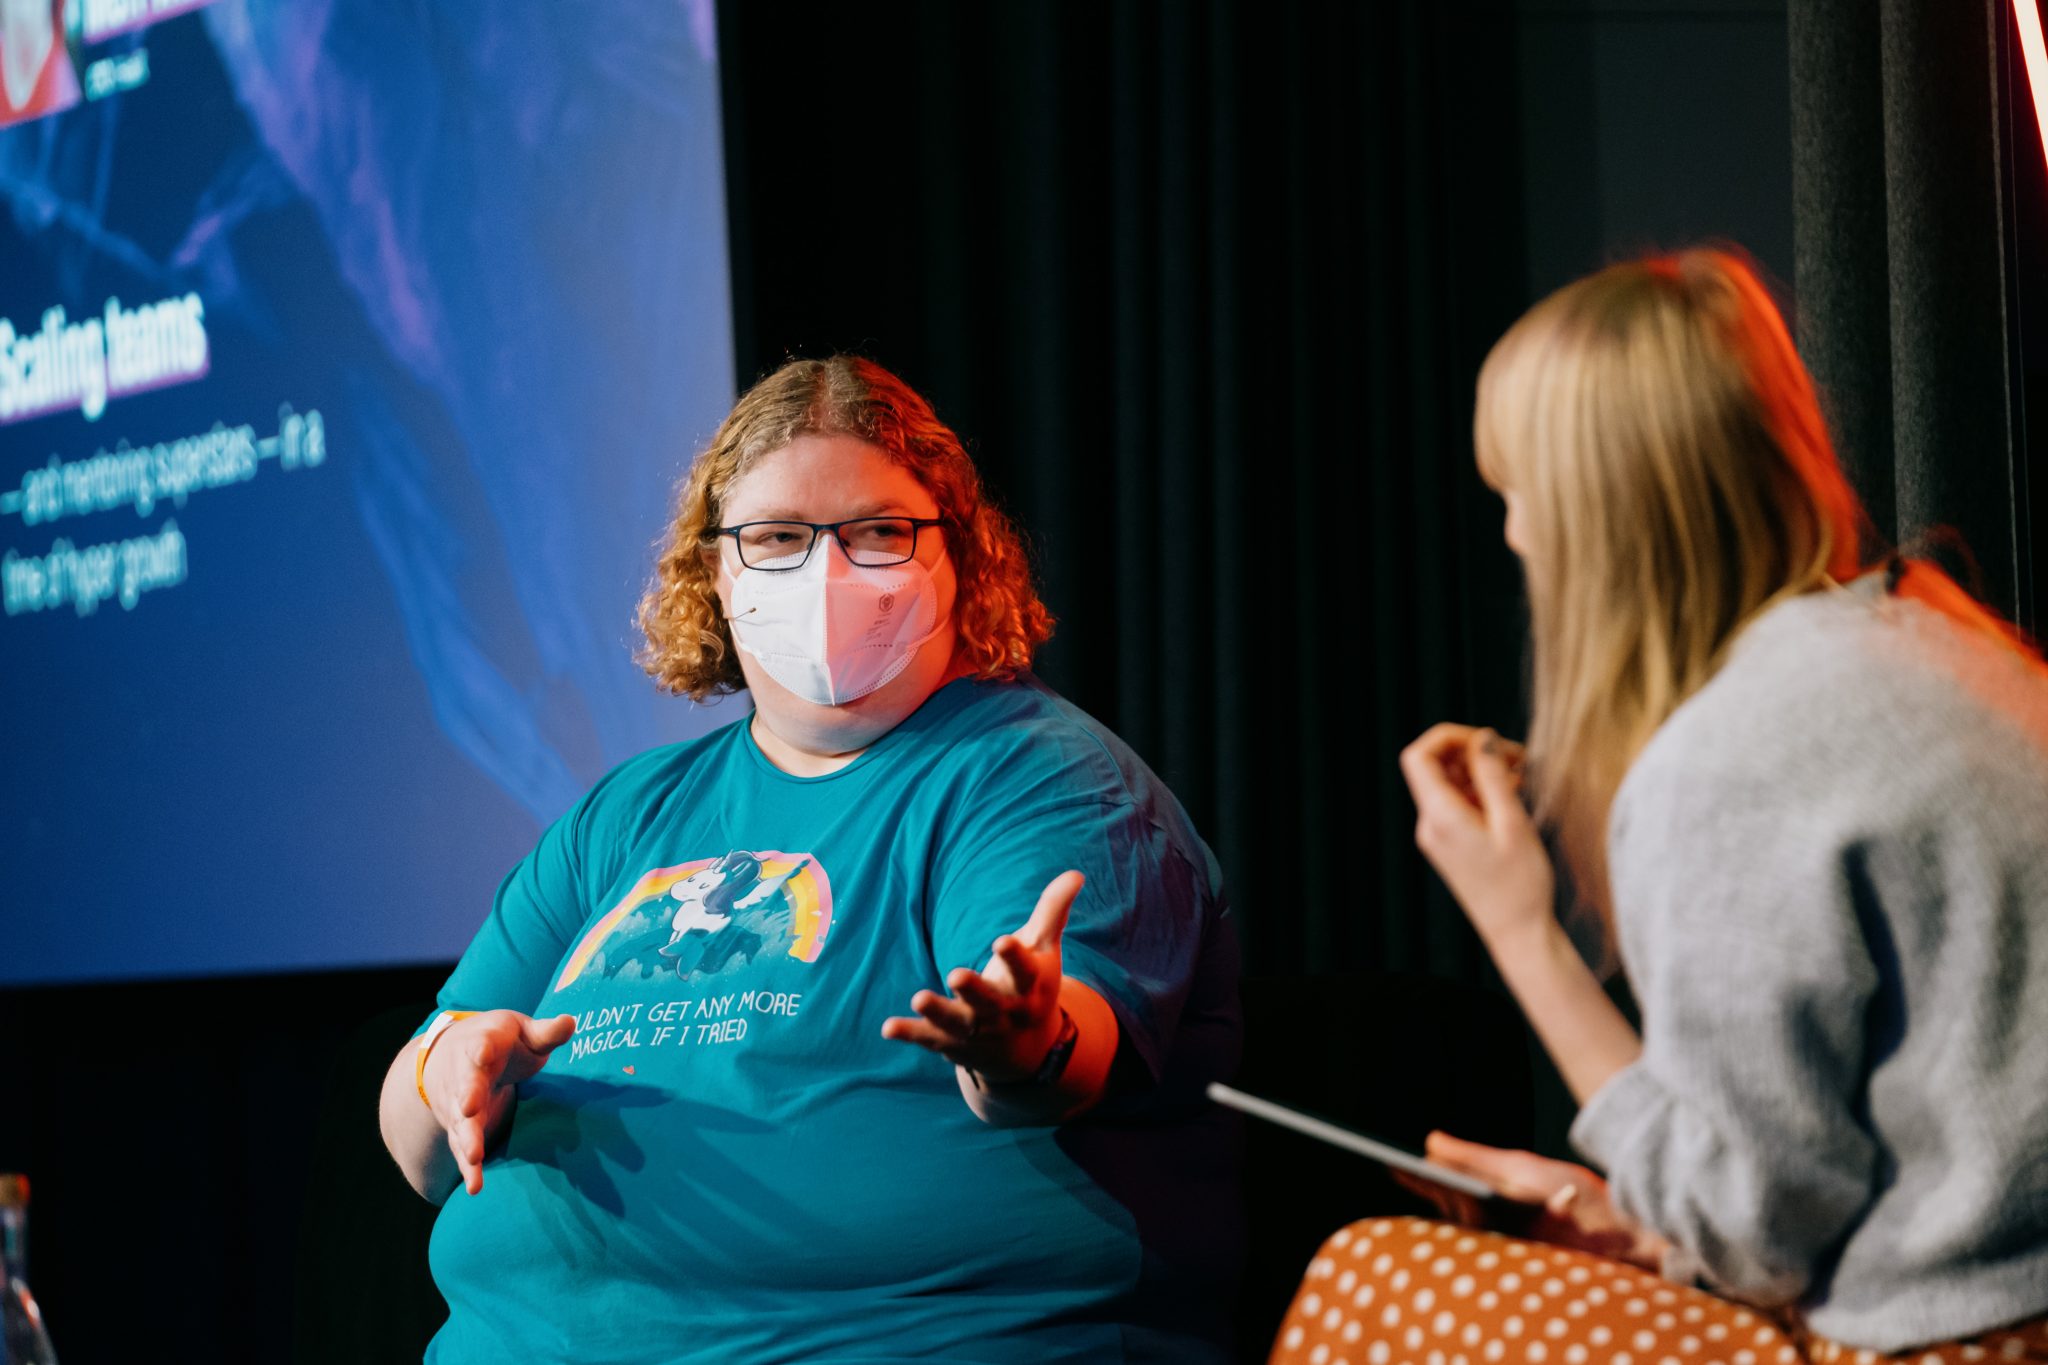 An image of experienced CTO and adviser Meri Williams, being interviewed on stage by Sifted editor Amy Lewin